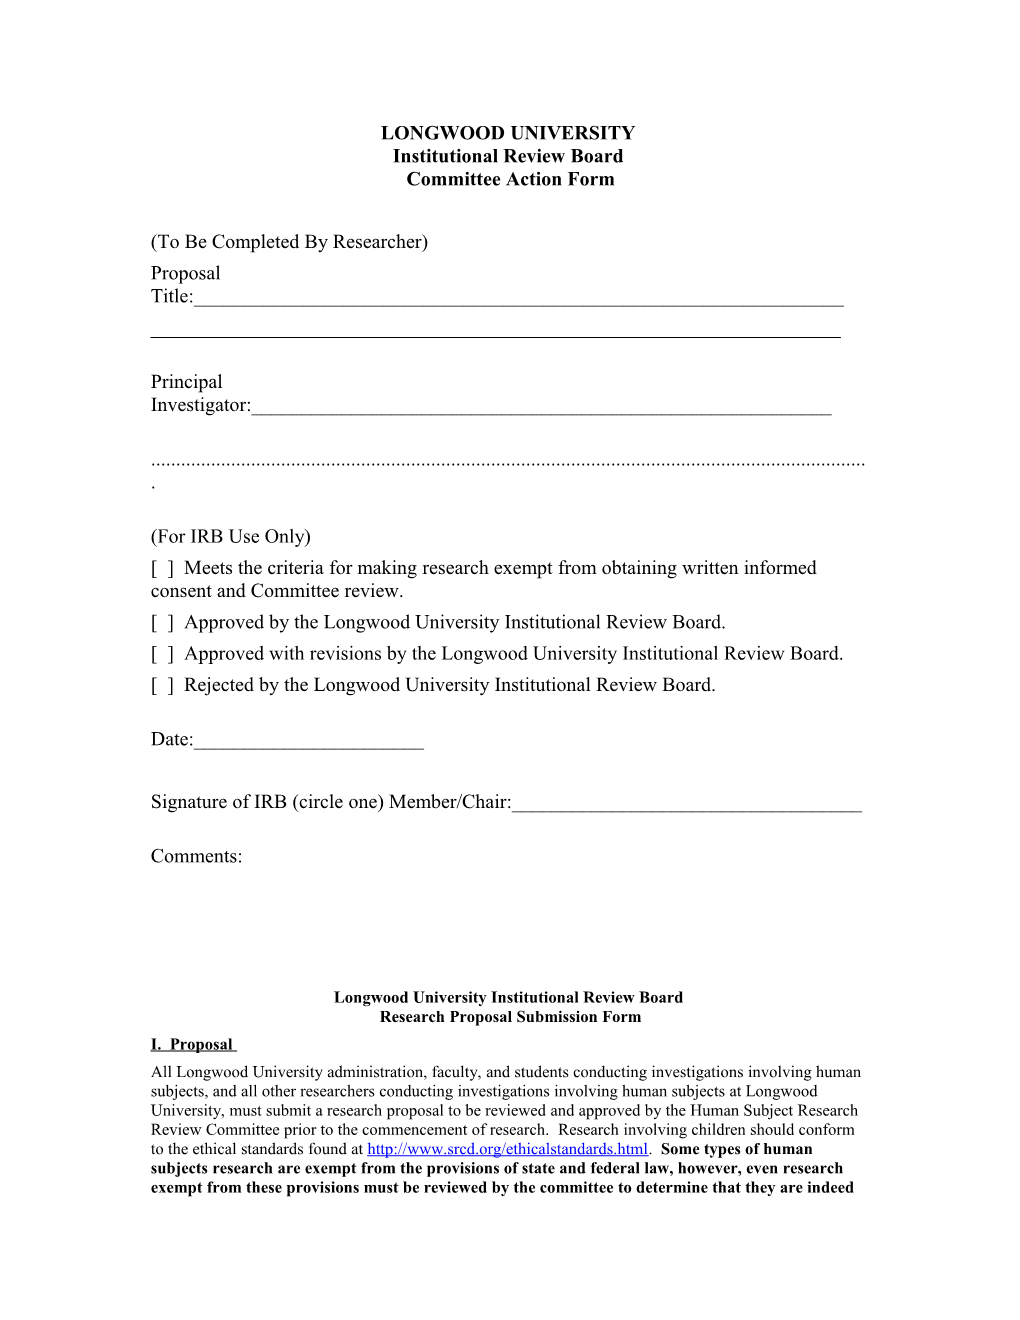 LONGWOOD UNIVERSITY Institutional Review Board Committee Action Form